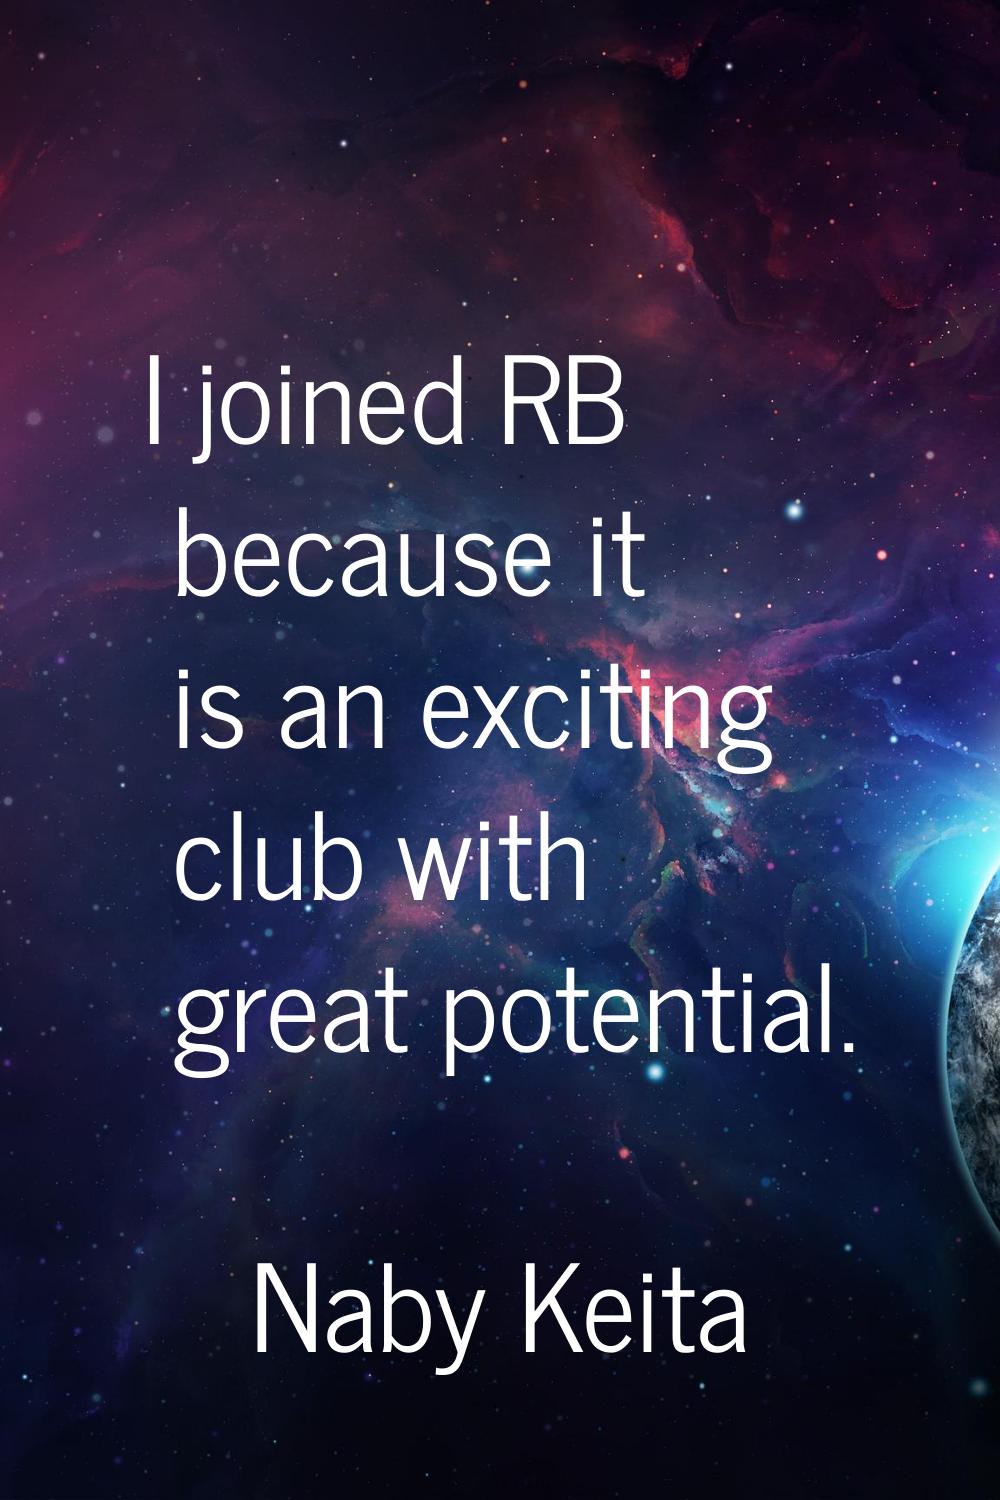 I joined RB because it is an exciting club with great potential.